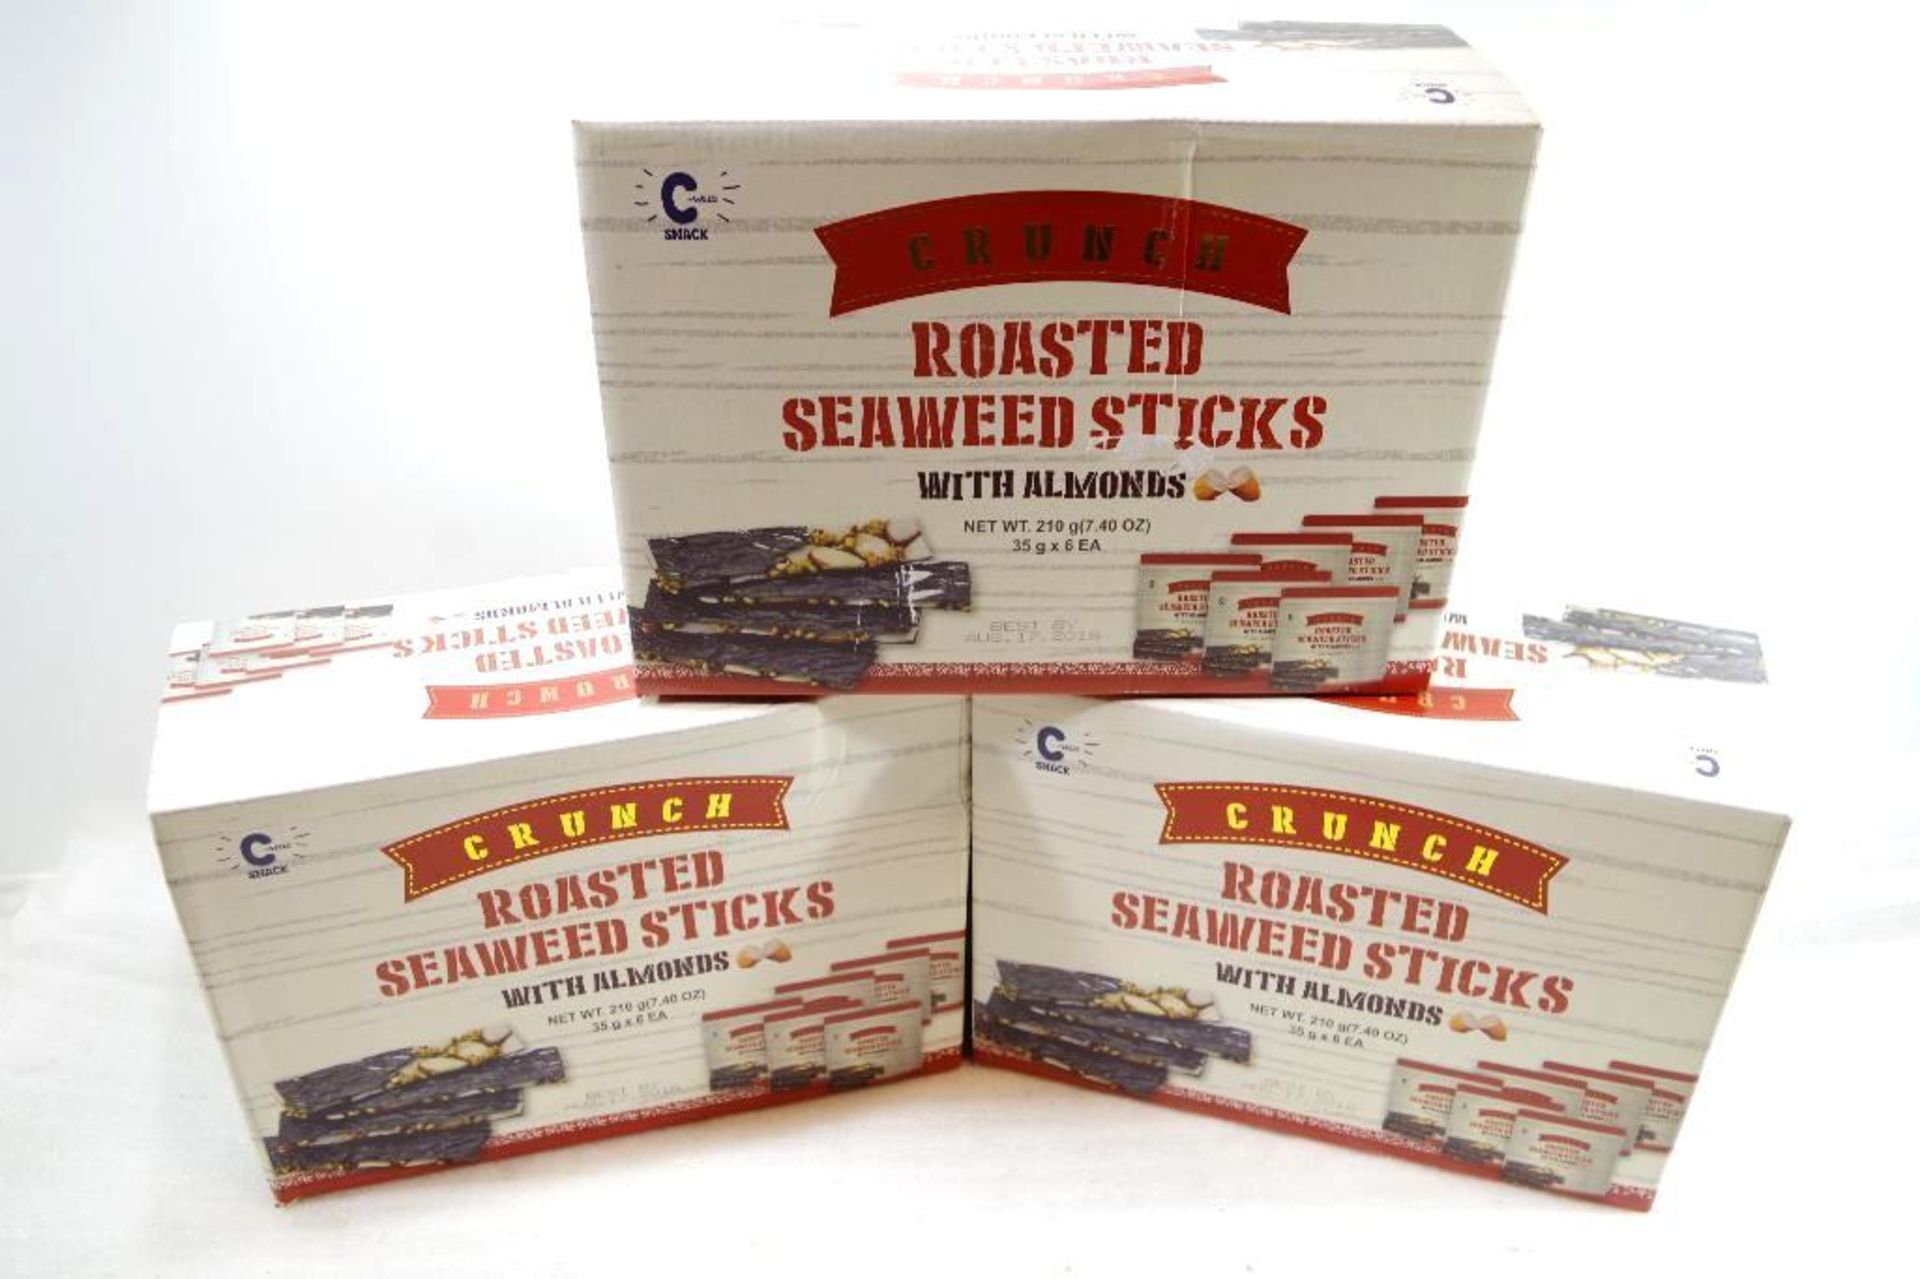 [18] NEW CRUNCH Roasted Seaweed Sticks w/ Almonds, Best by August 17, 2018 (3 Boxes of 6 each)